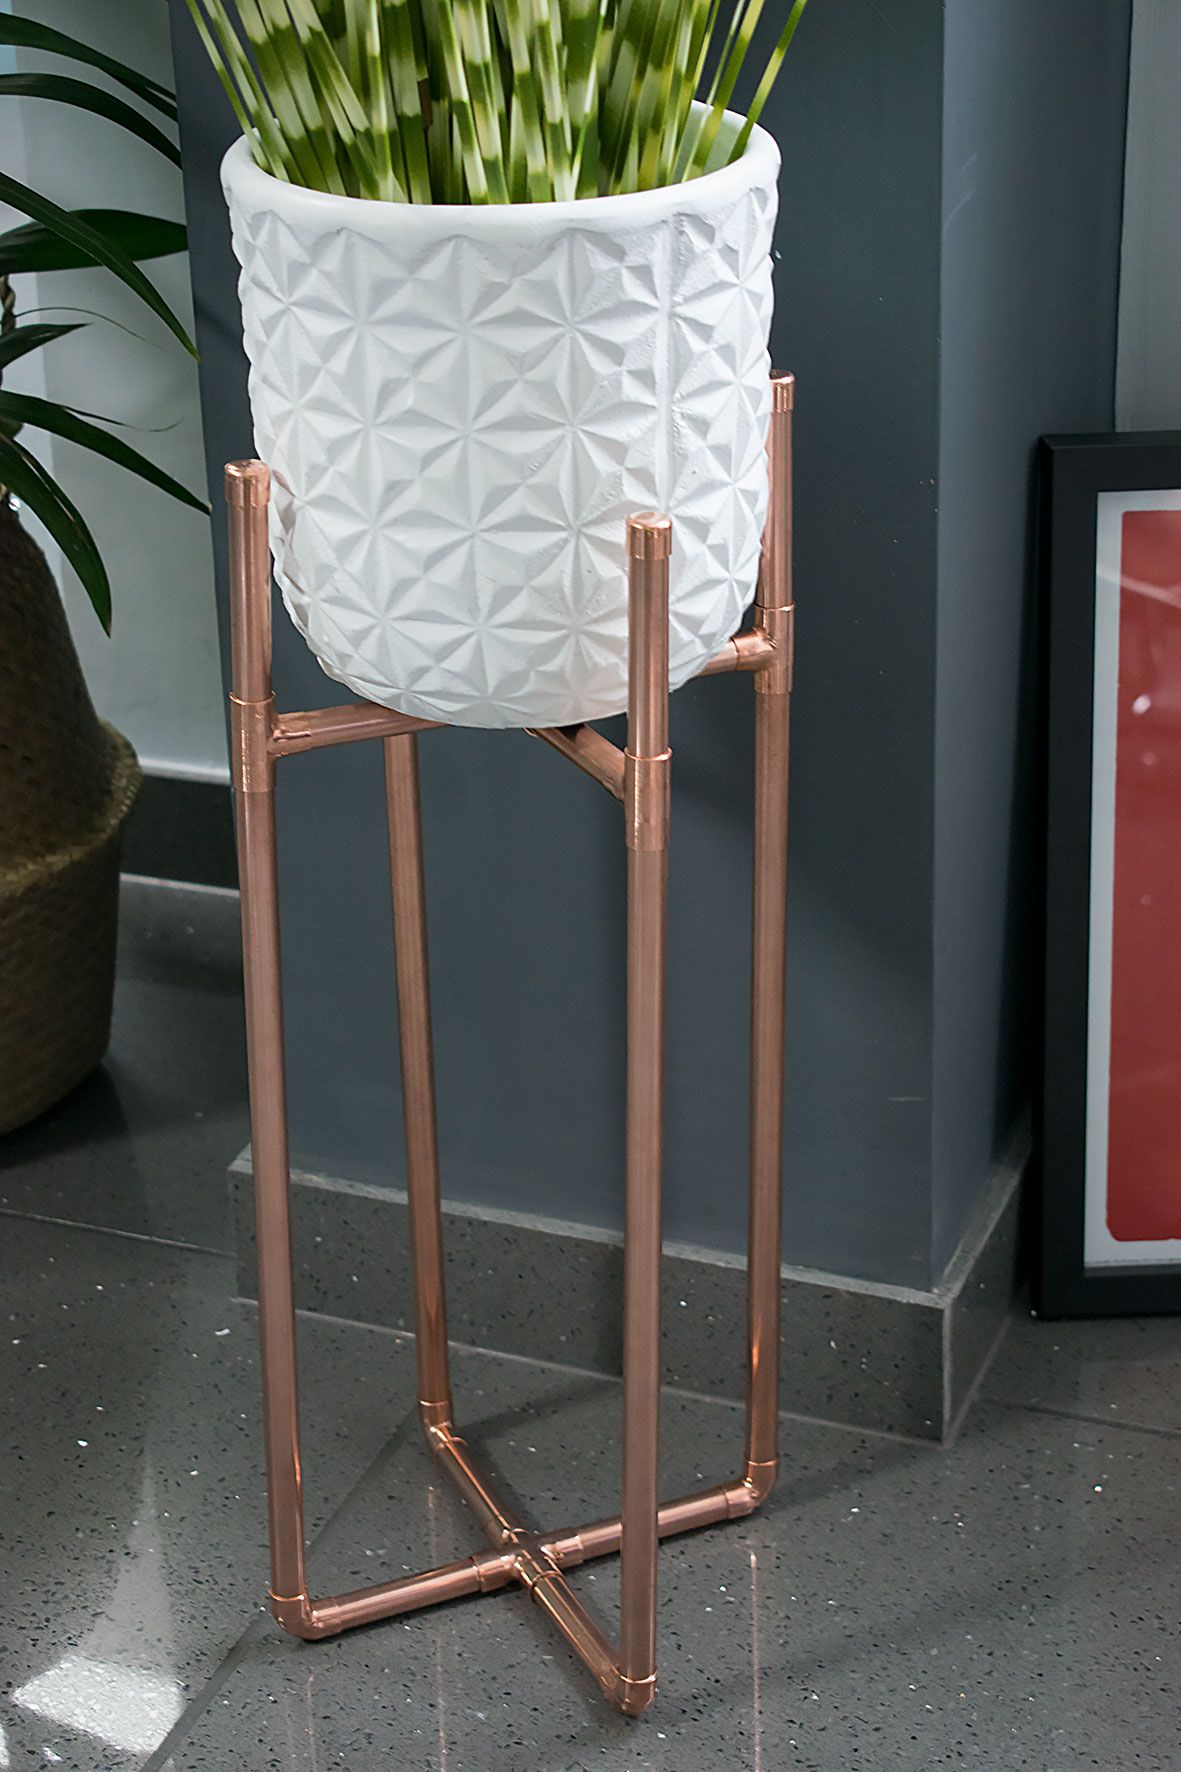 How To Make A Diy Copper Plant Stand – Caradise Pertaining To Copper Plant Stands (View 2 of 15)